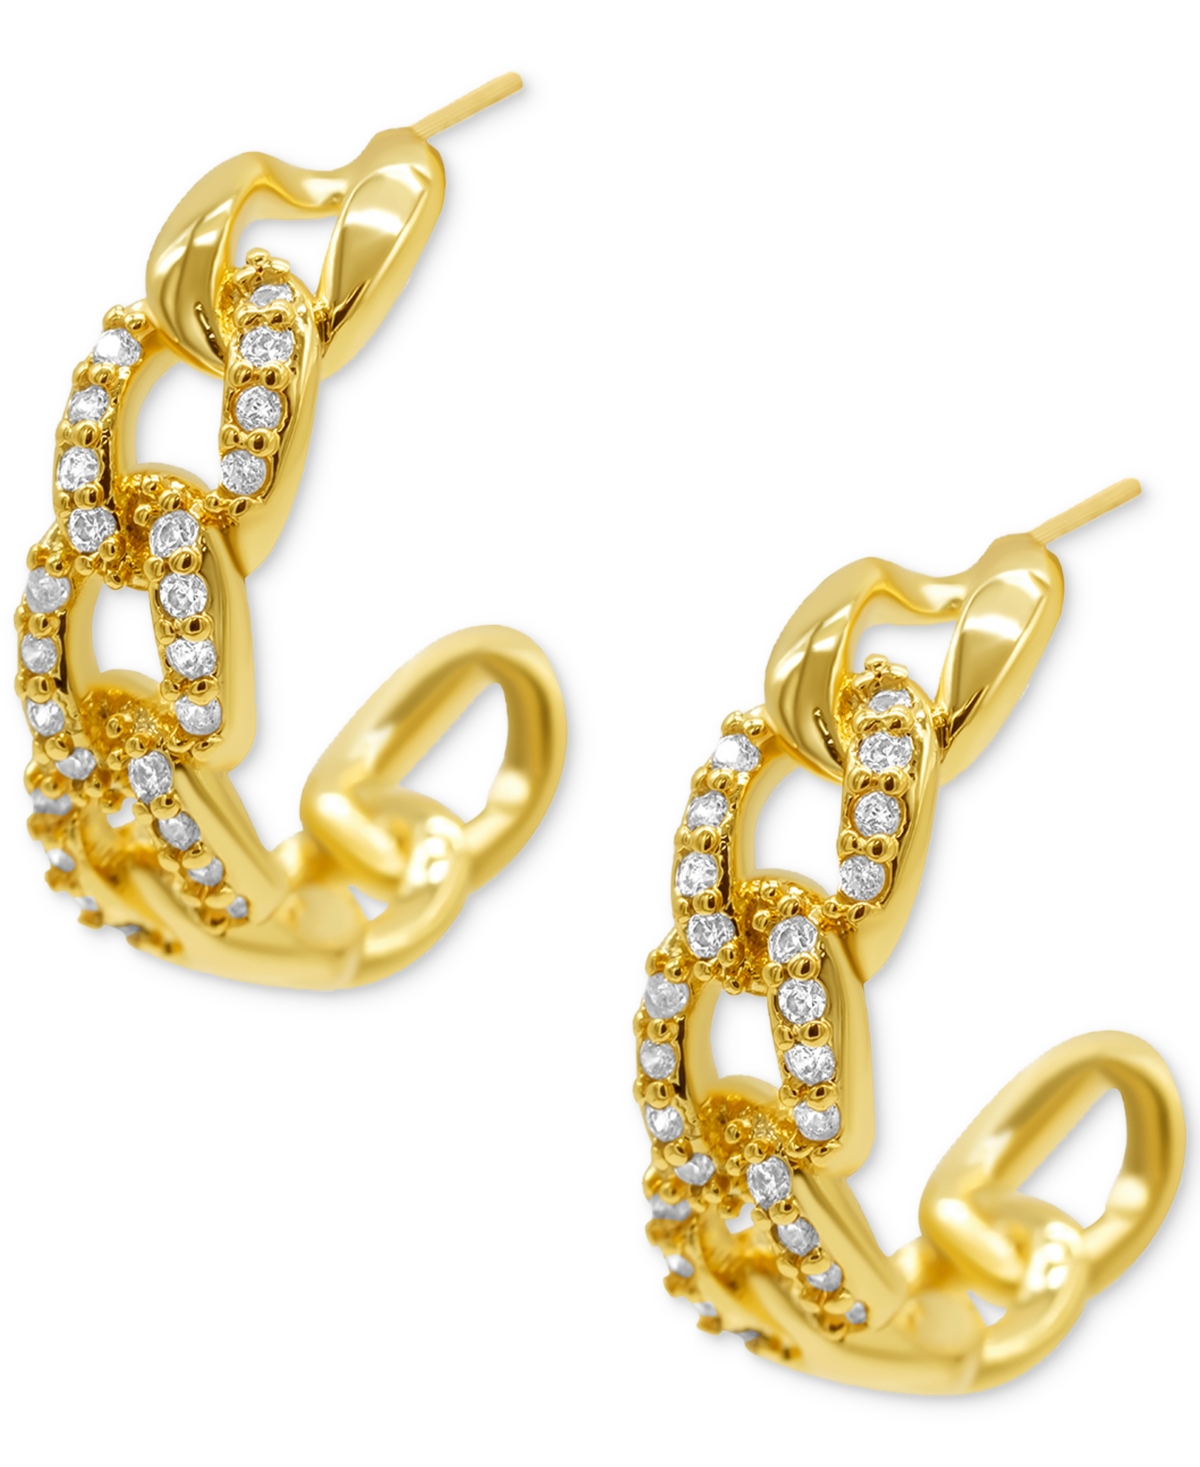 14k Gold-Plated Small Pave Curb Chain Huggie Hoop Earrings, 0.75" - Gold